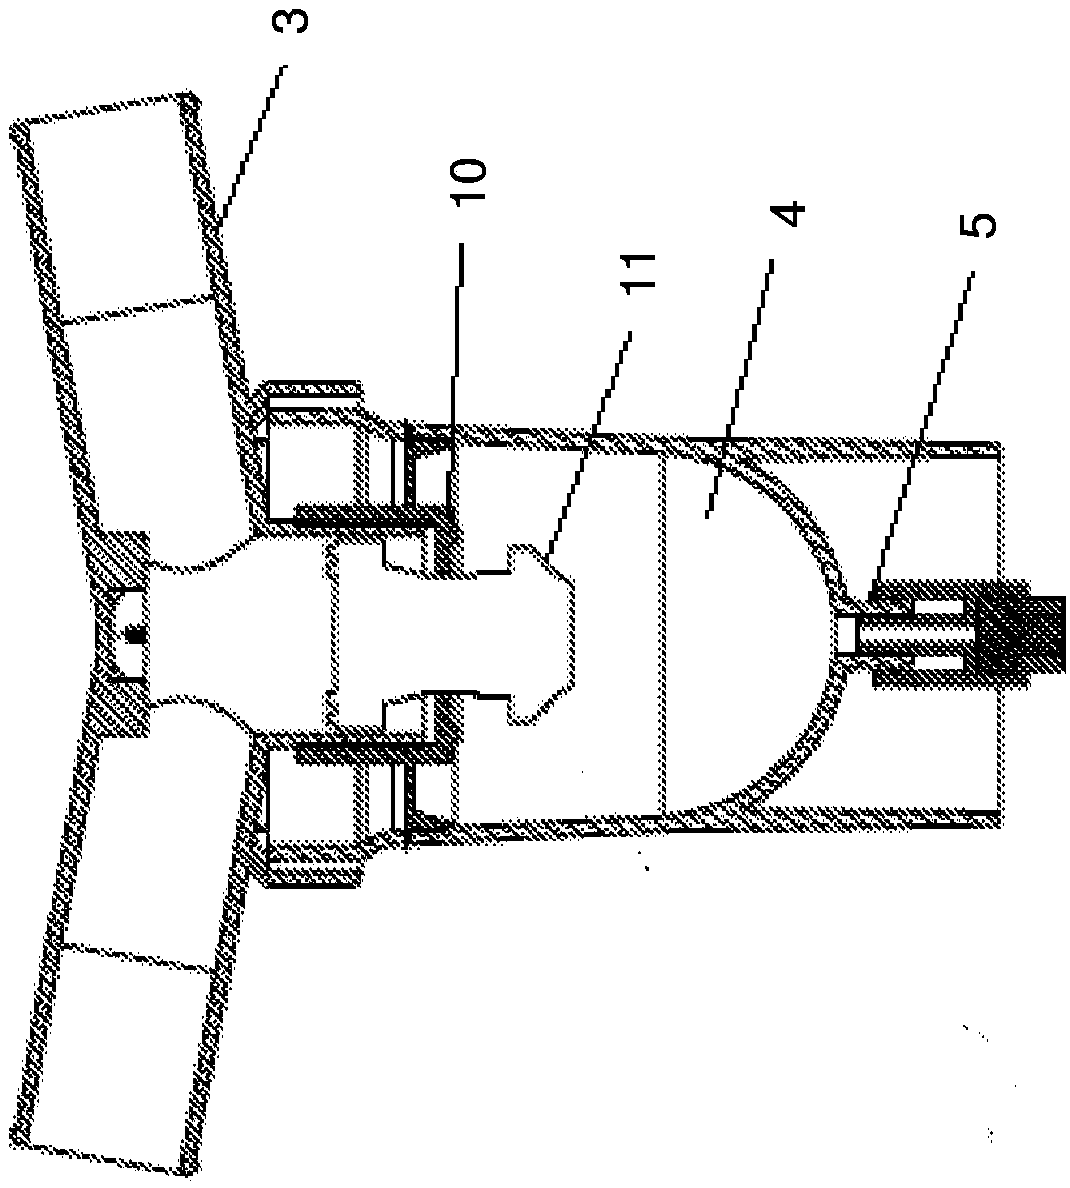 Coaxial and double lumen breathing circuit systems having a lung pressure measurement port and closed system water trap which can be drained with an enjector